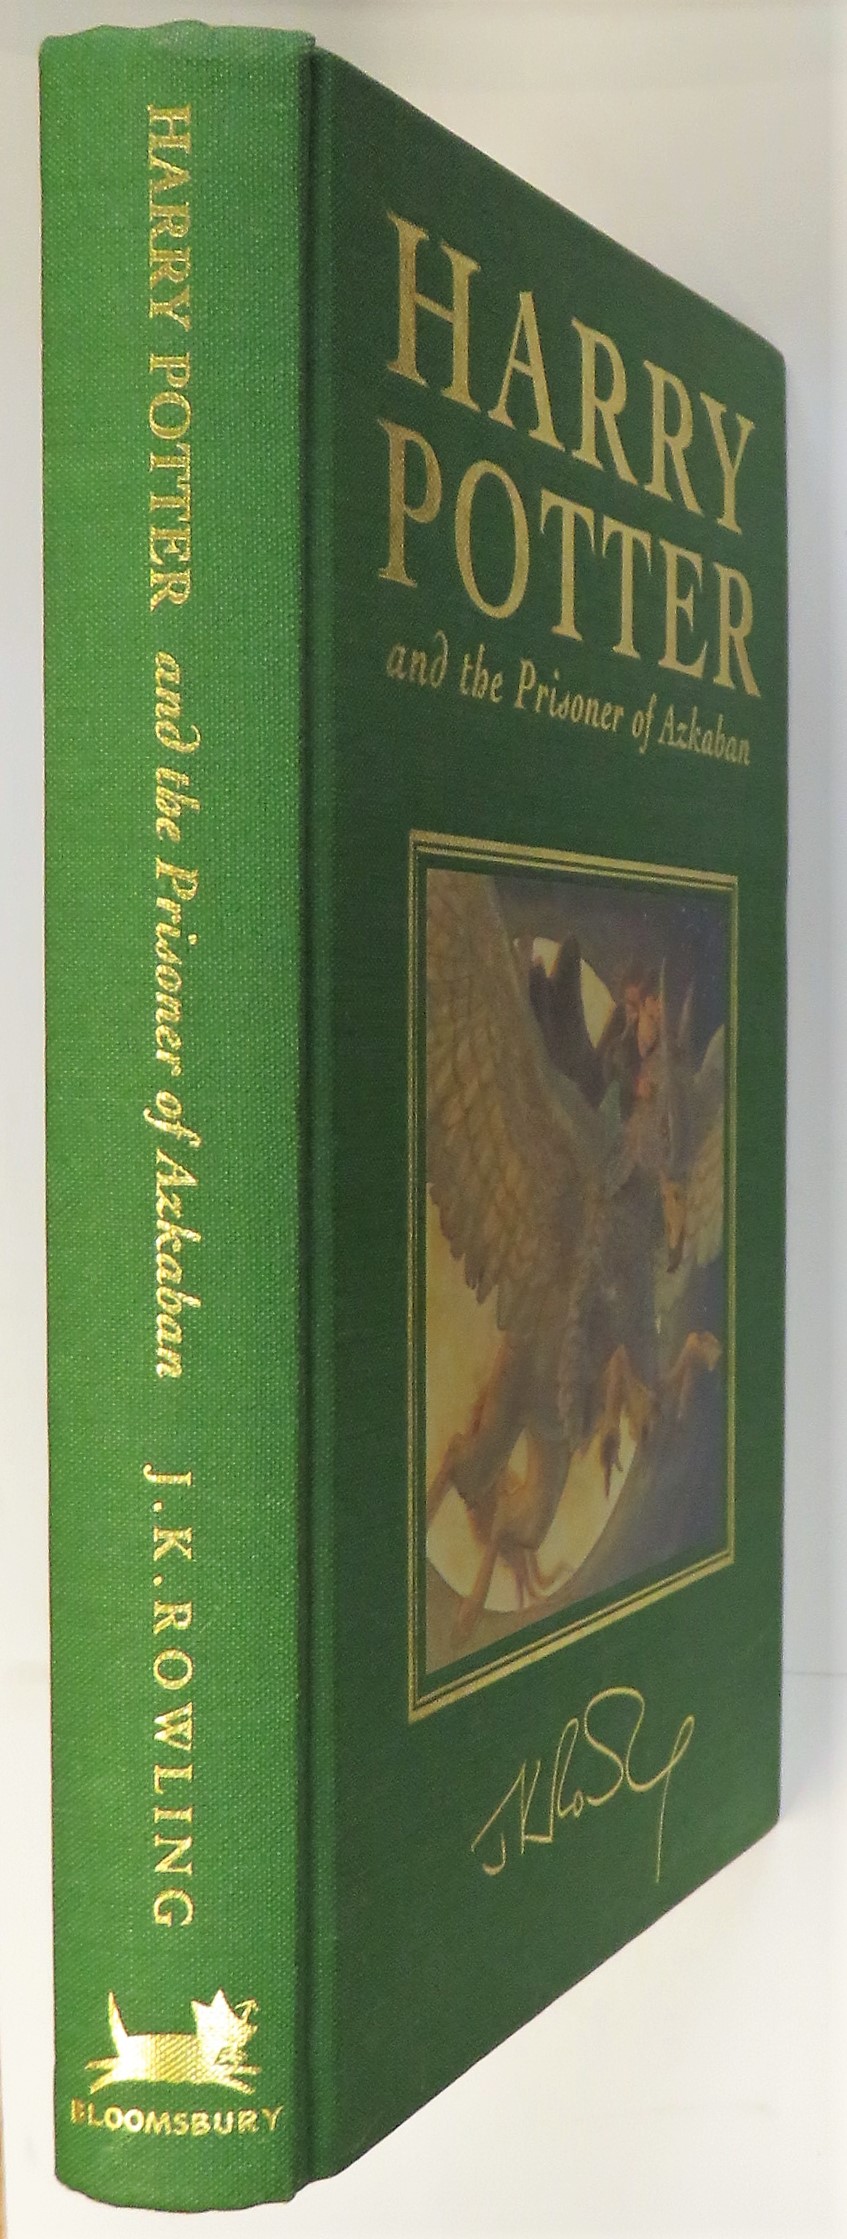 Harry Potter and the Prisoner of Azkaban Deluxe Second Edition